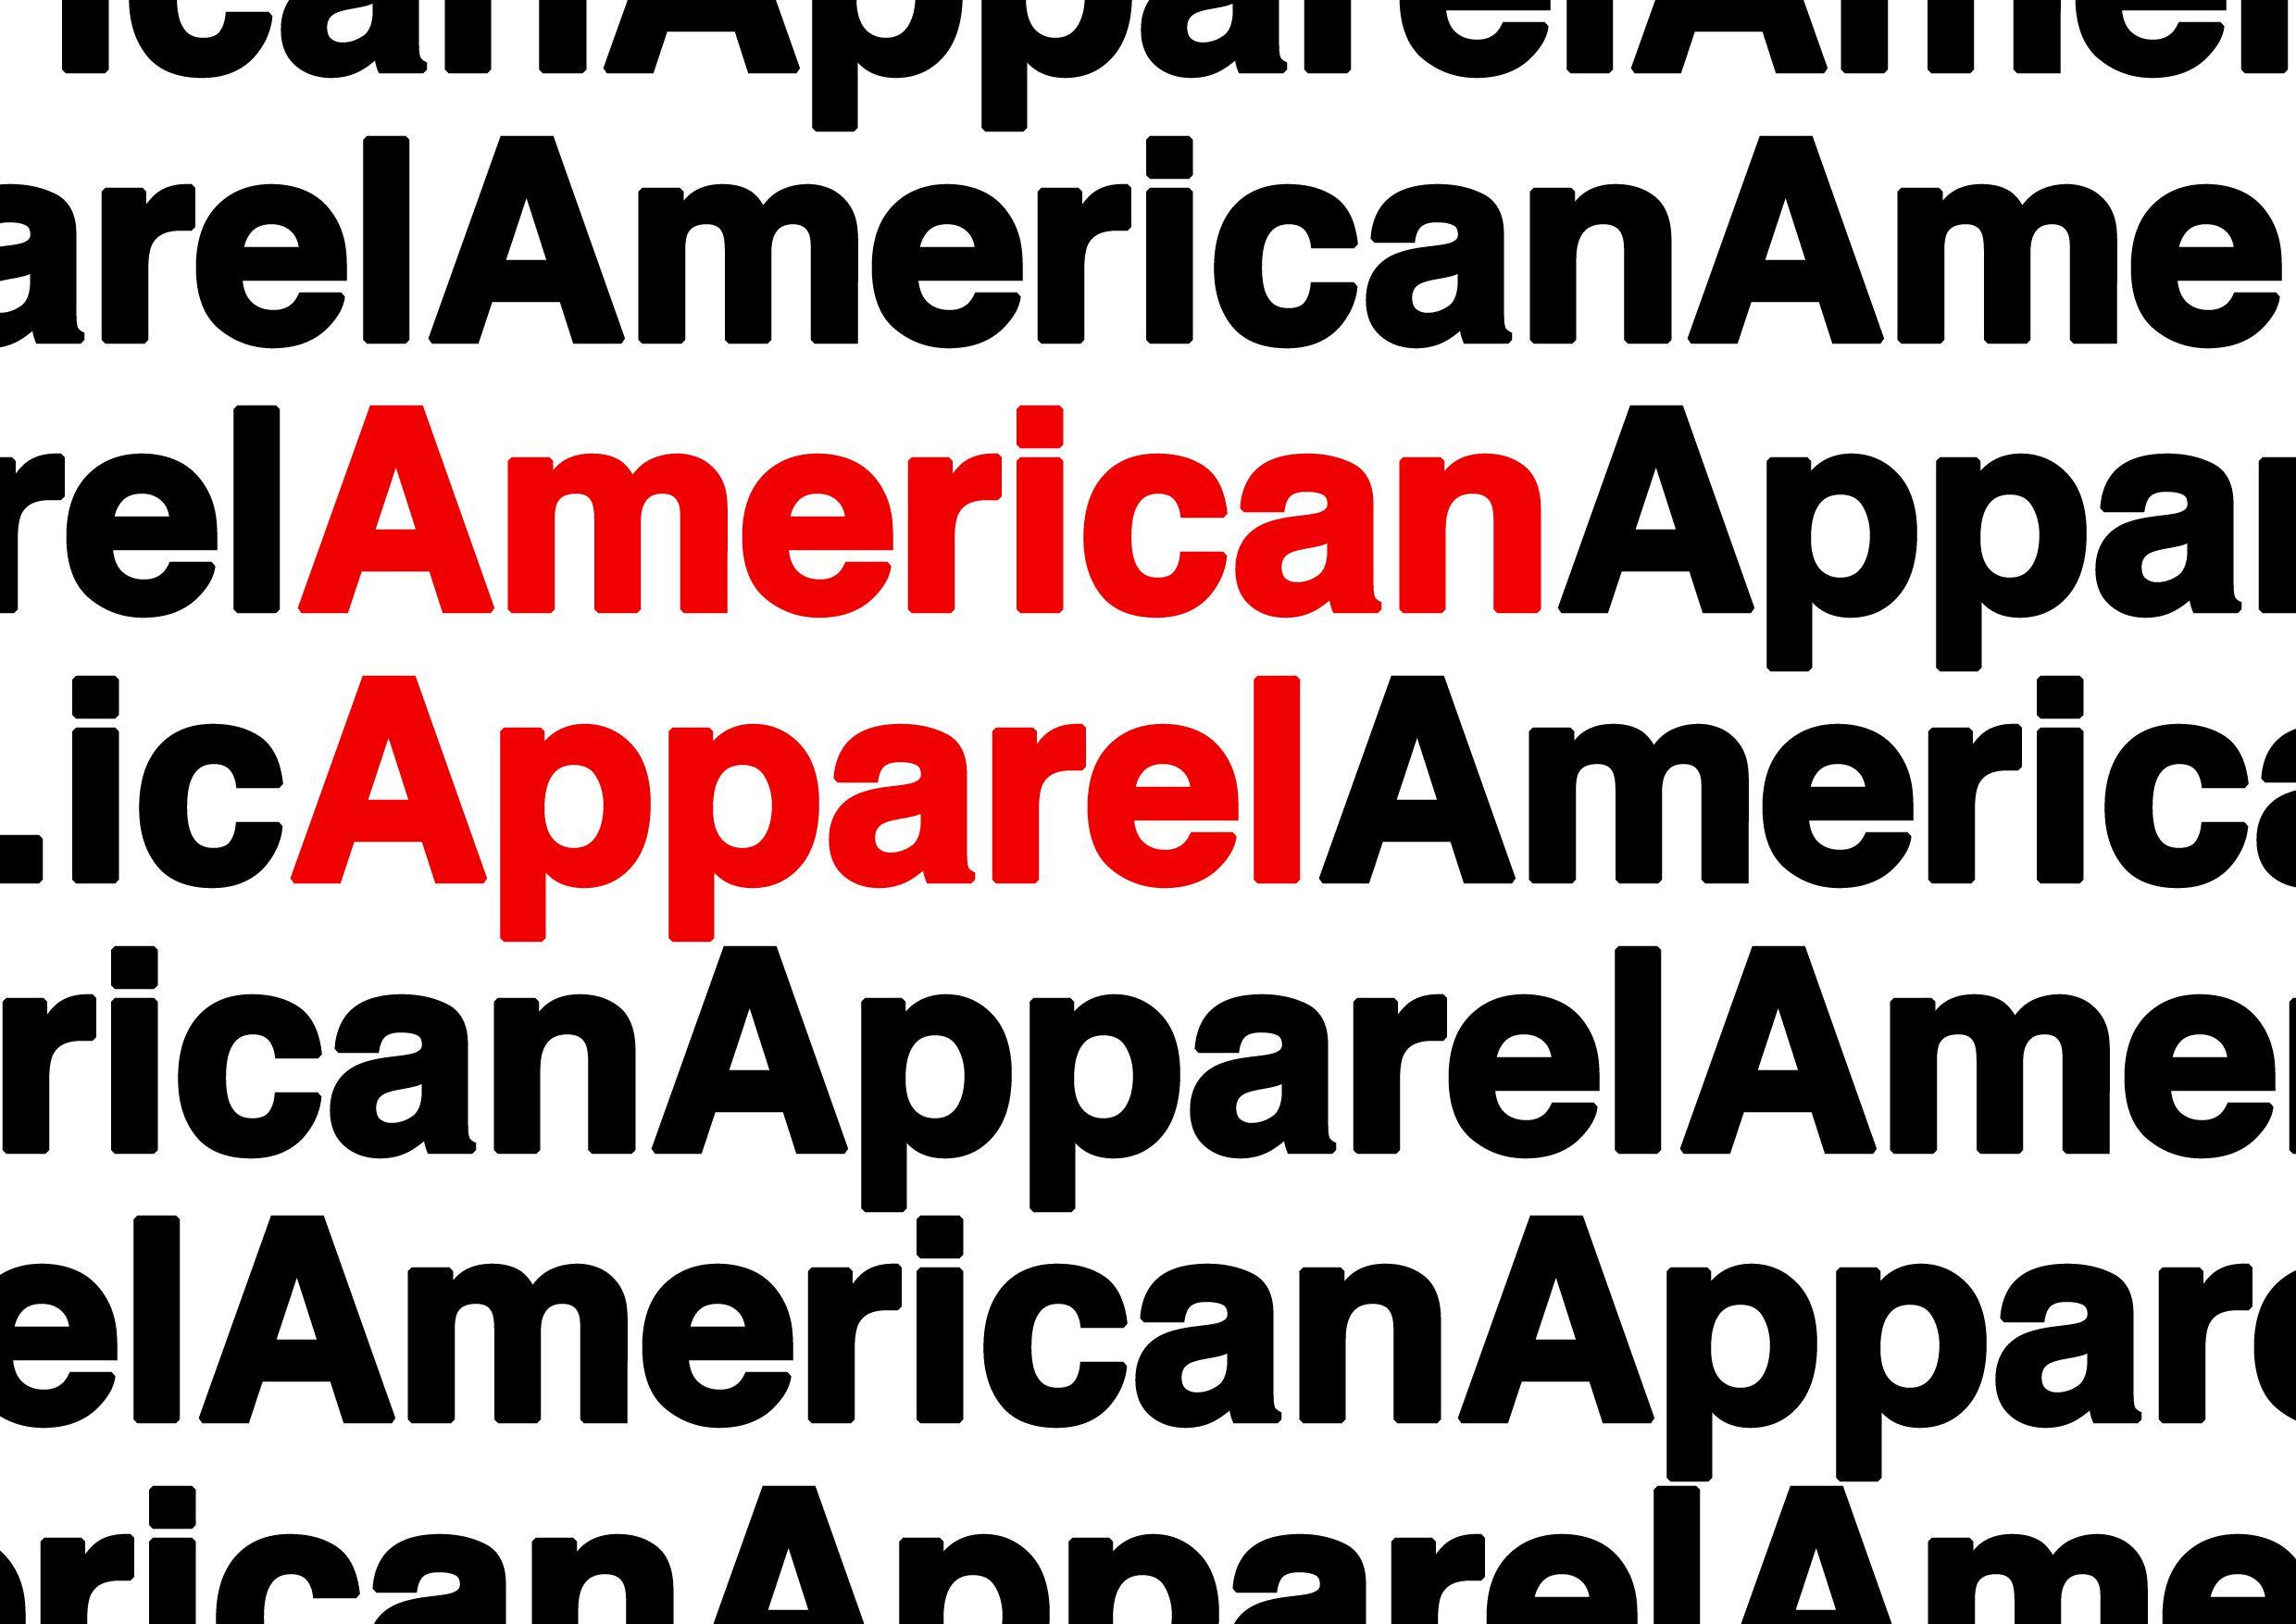 American Apparel Logo - Buy american apparel logo% OFF! Share discount